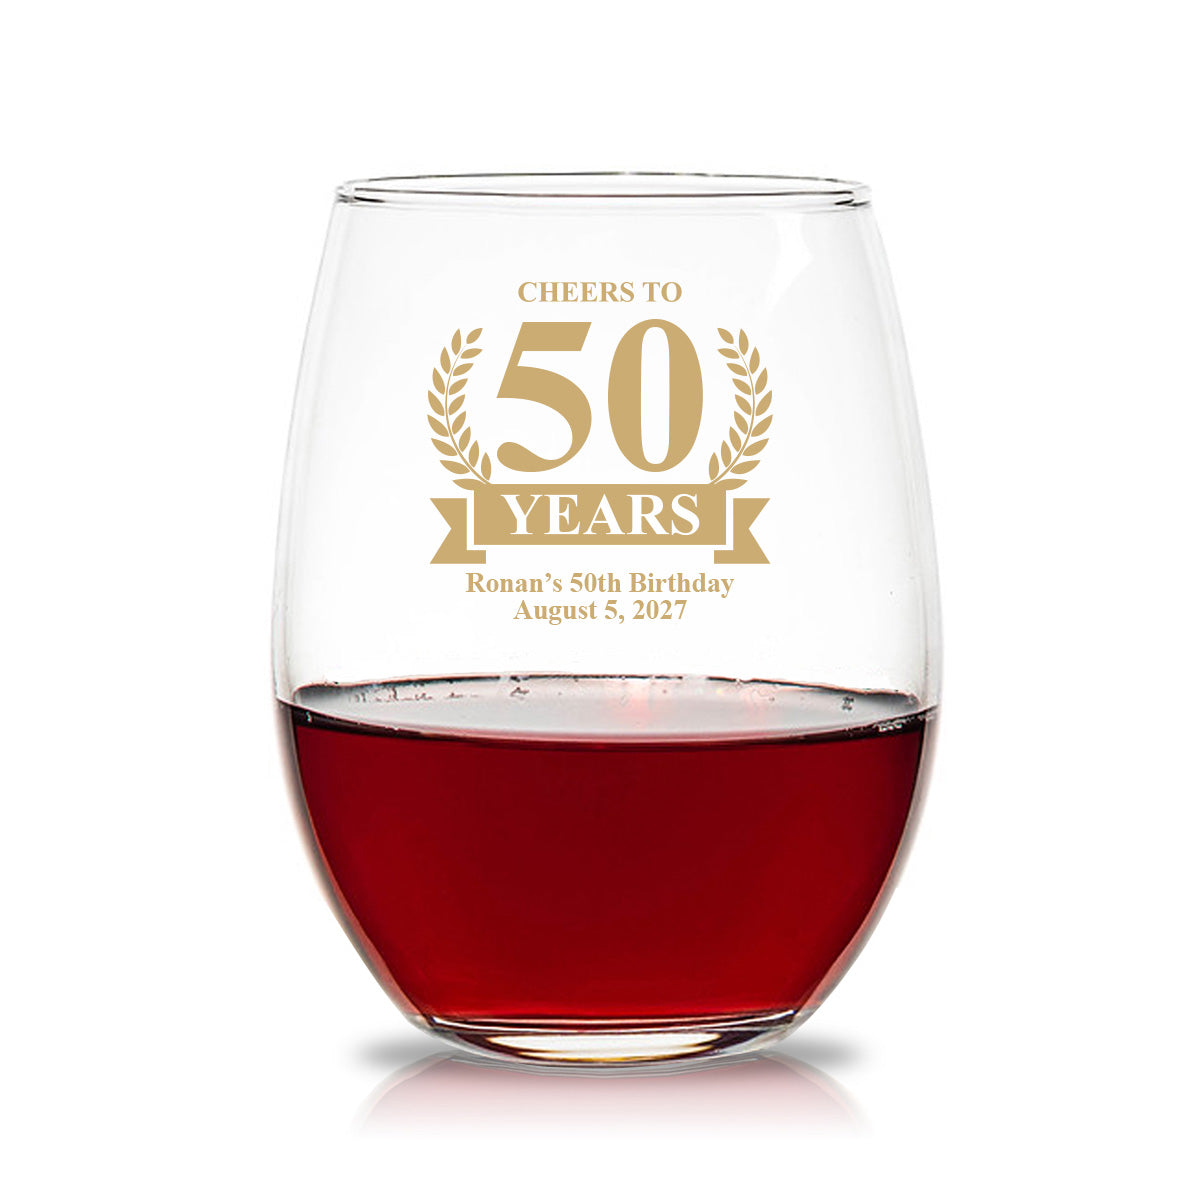 Cheers To 50 Years 15 oz. Stemless Wine Glasses (Set of 24)